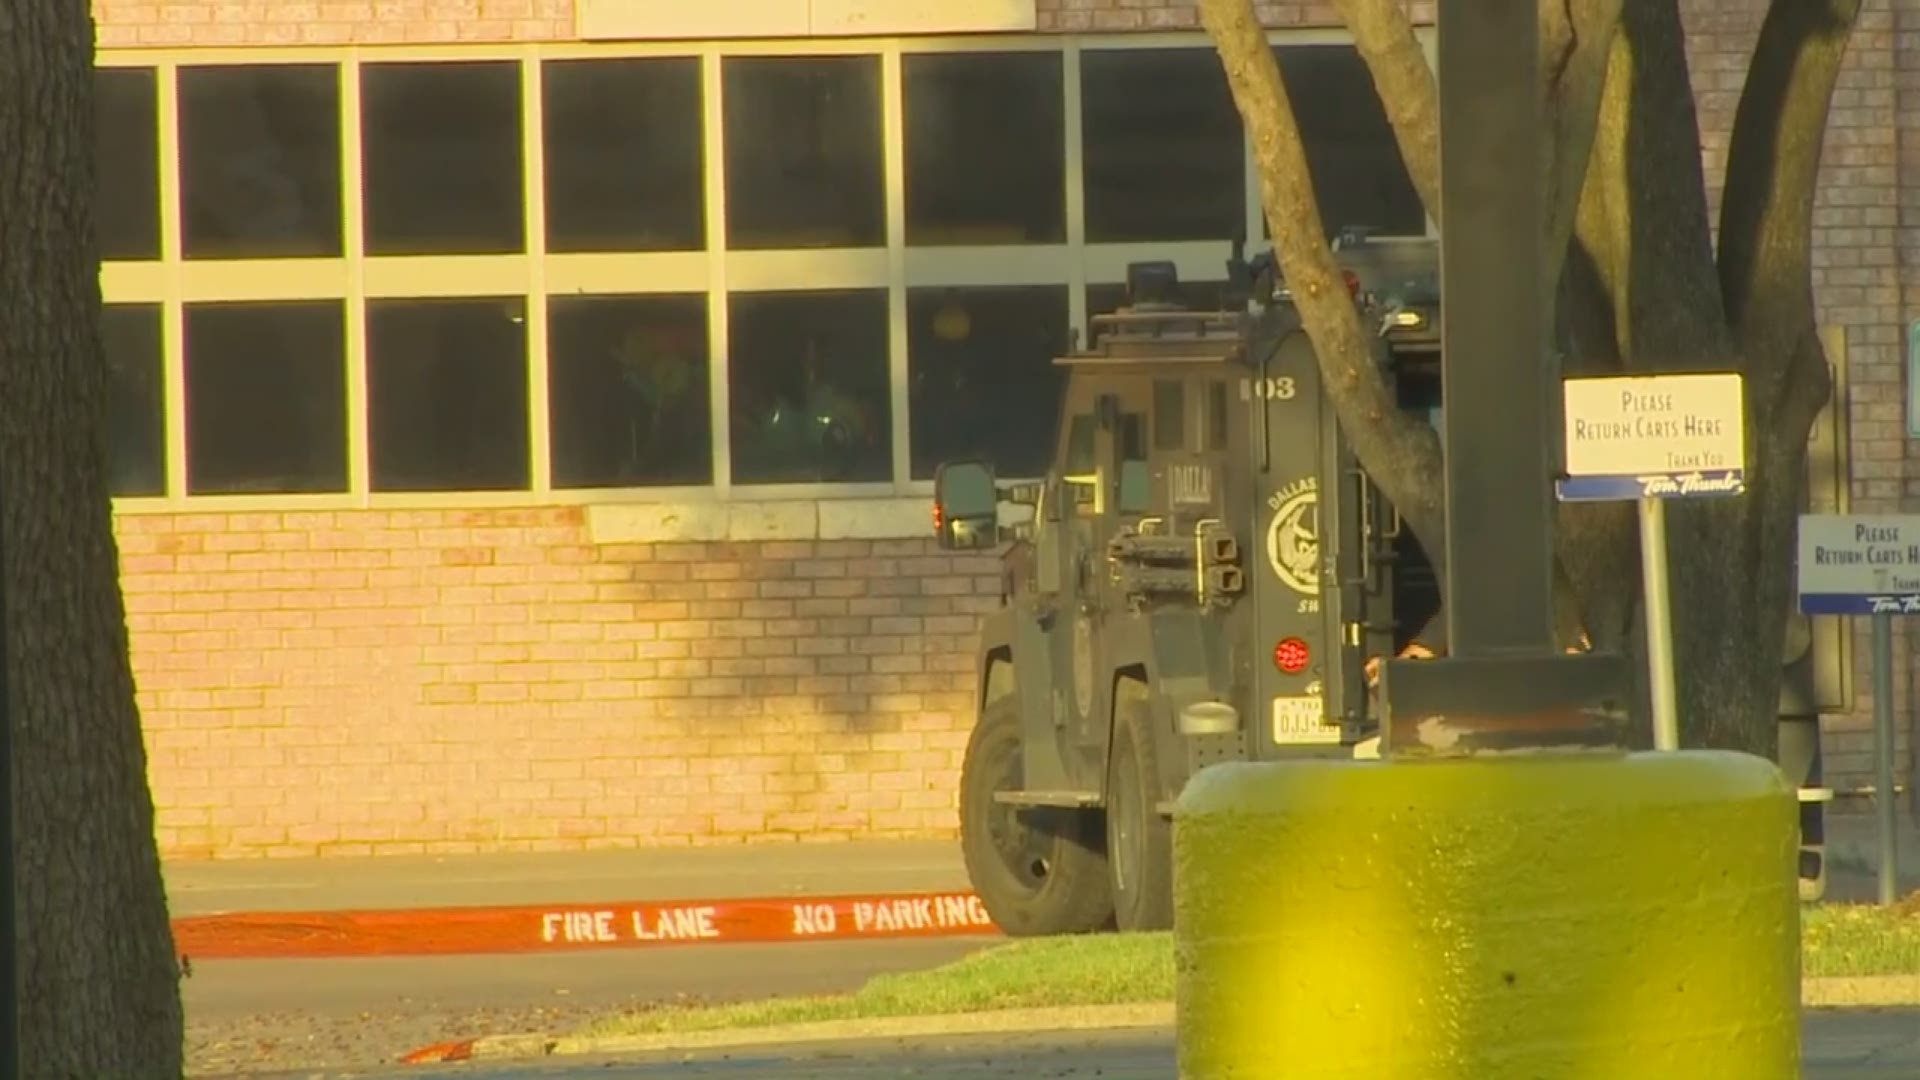 RAW VIDEO: SWAT on scene of shopping center in North Dallas